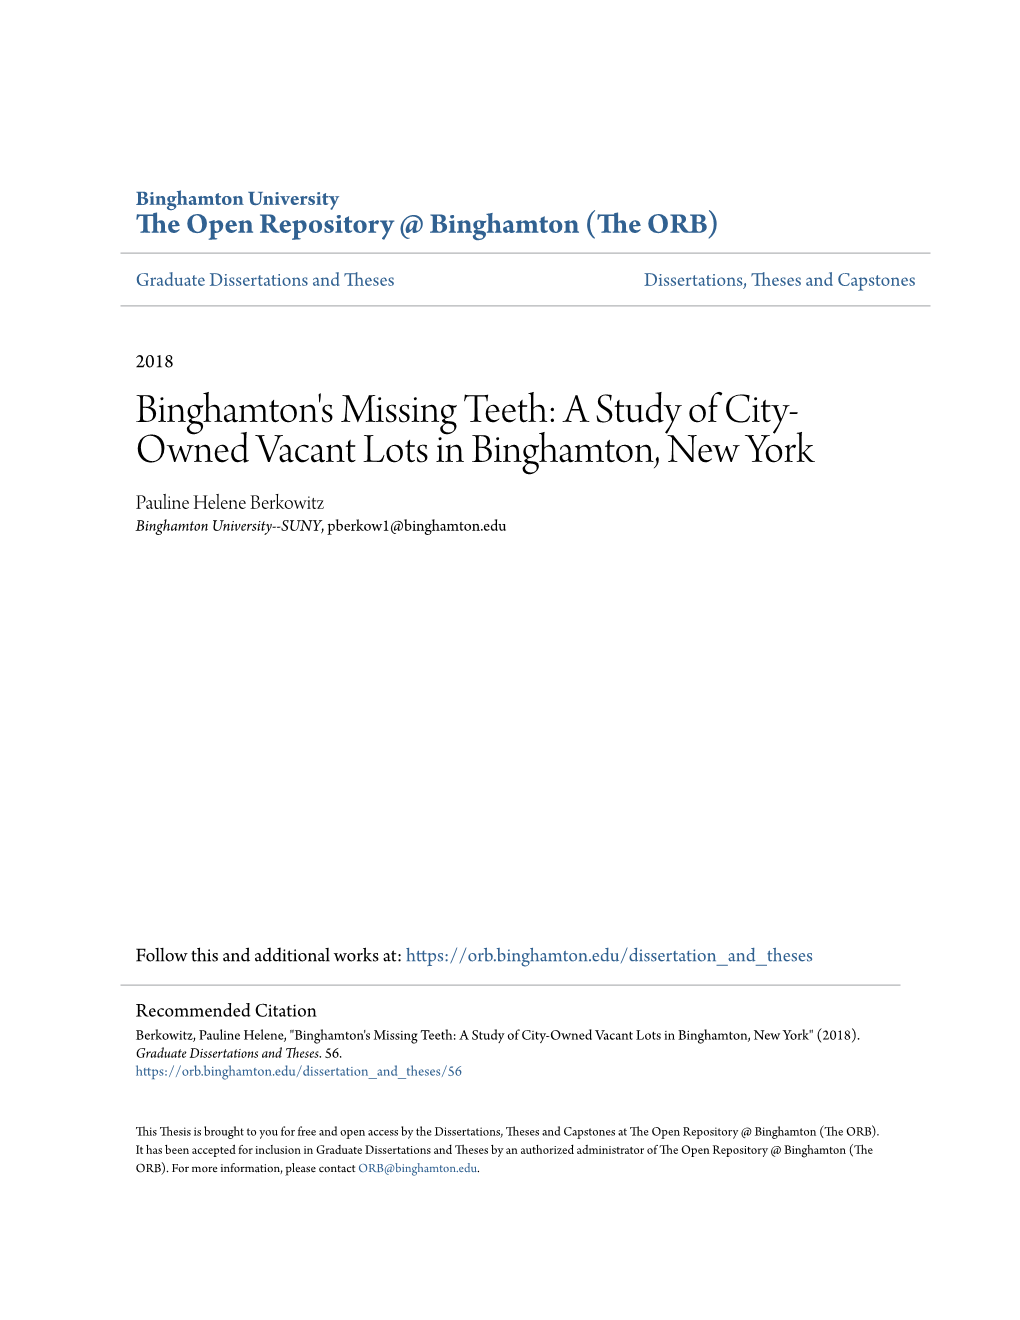 A Study of City-Owned Vacant Lots in Binghamton, New York" (2018)